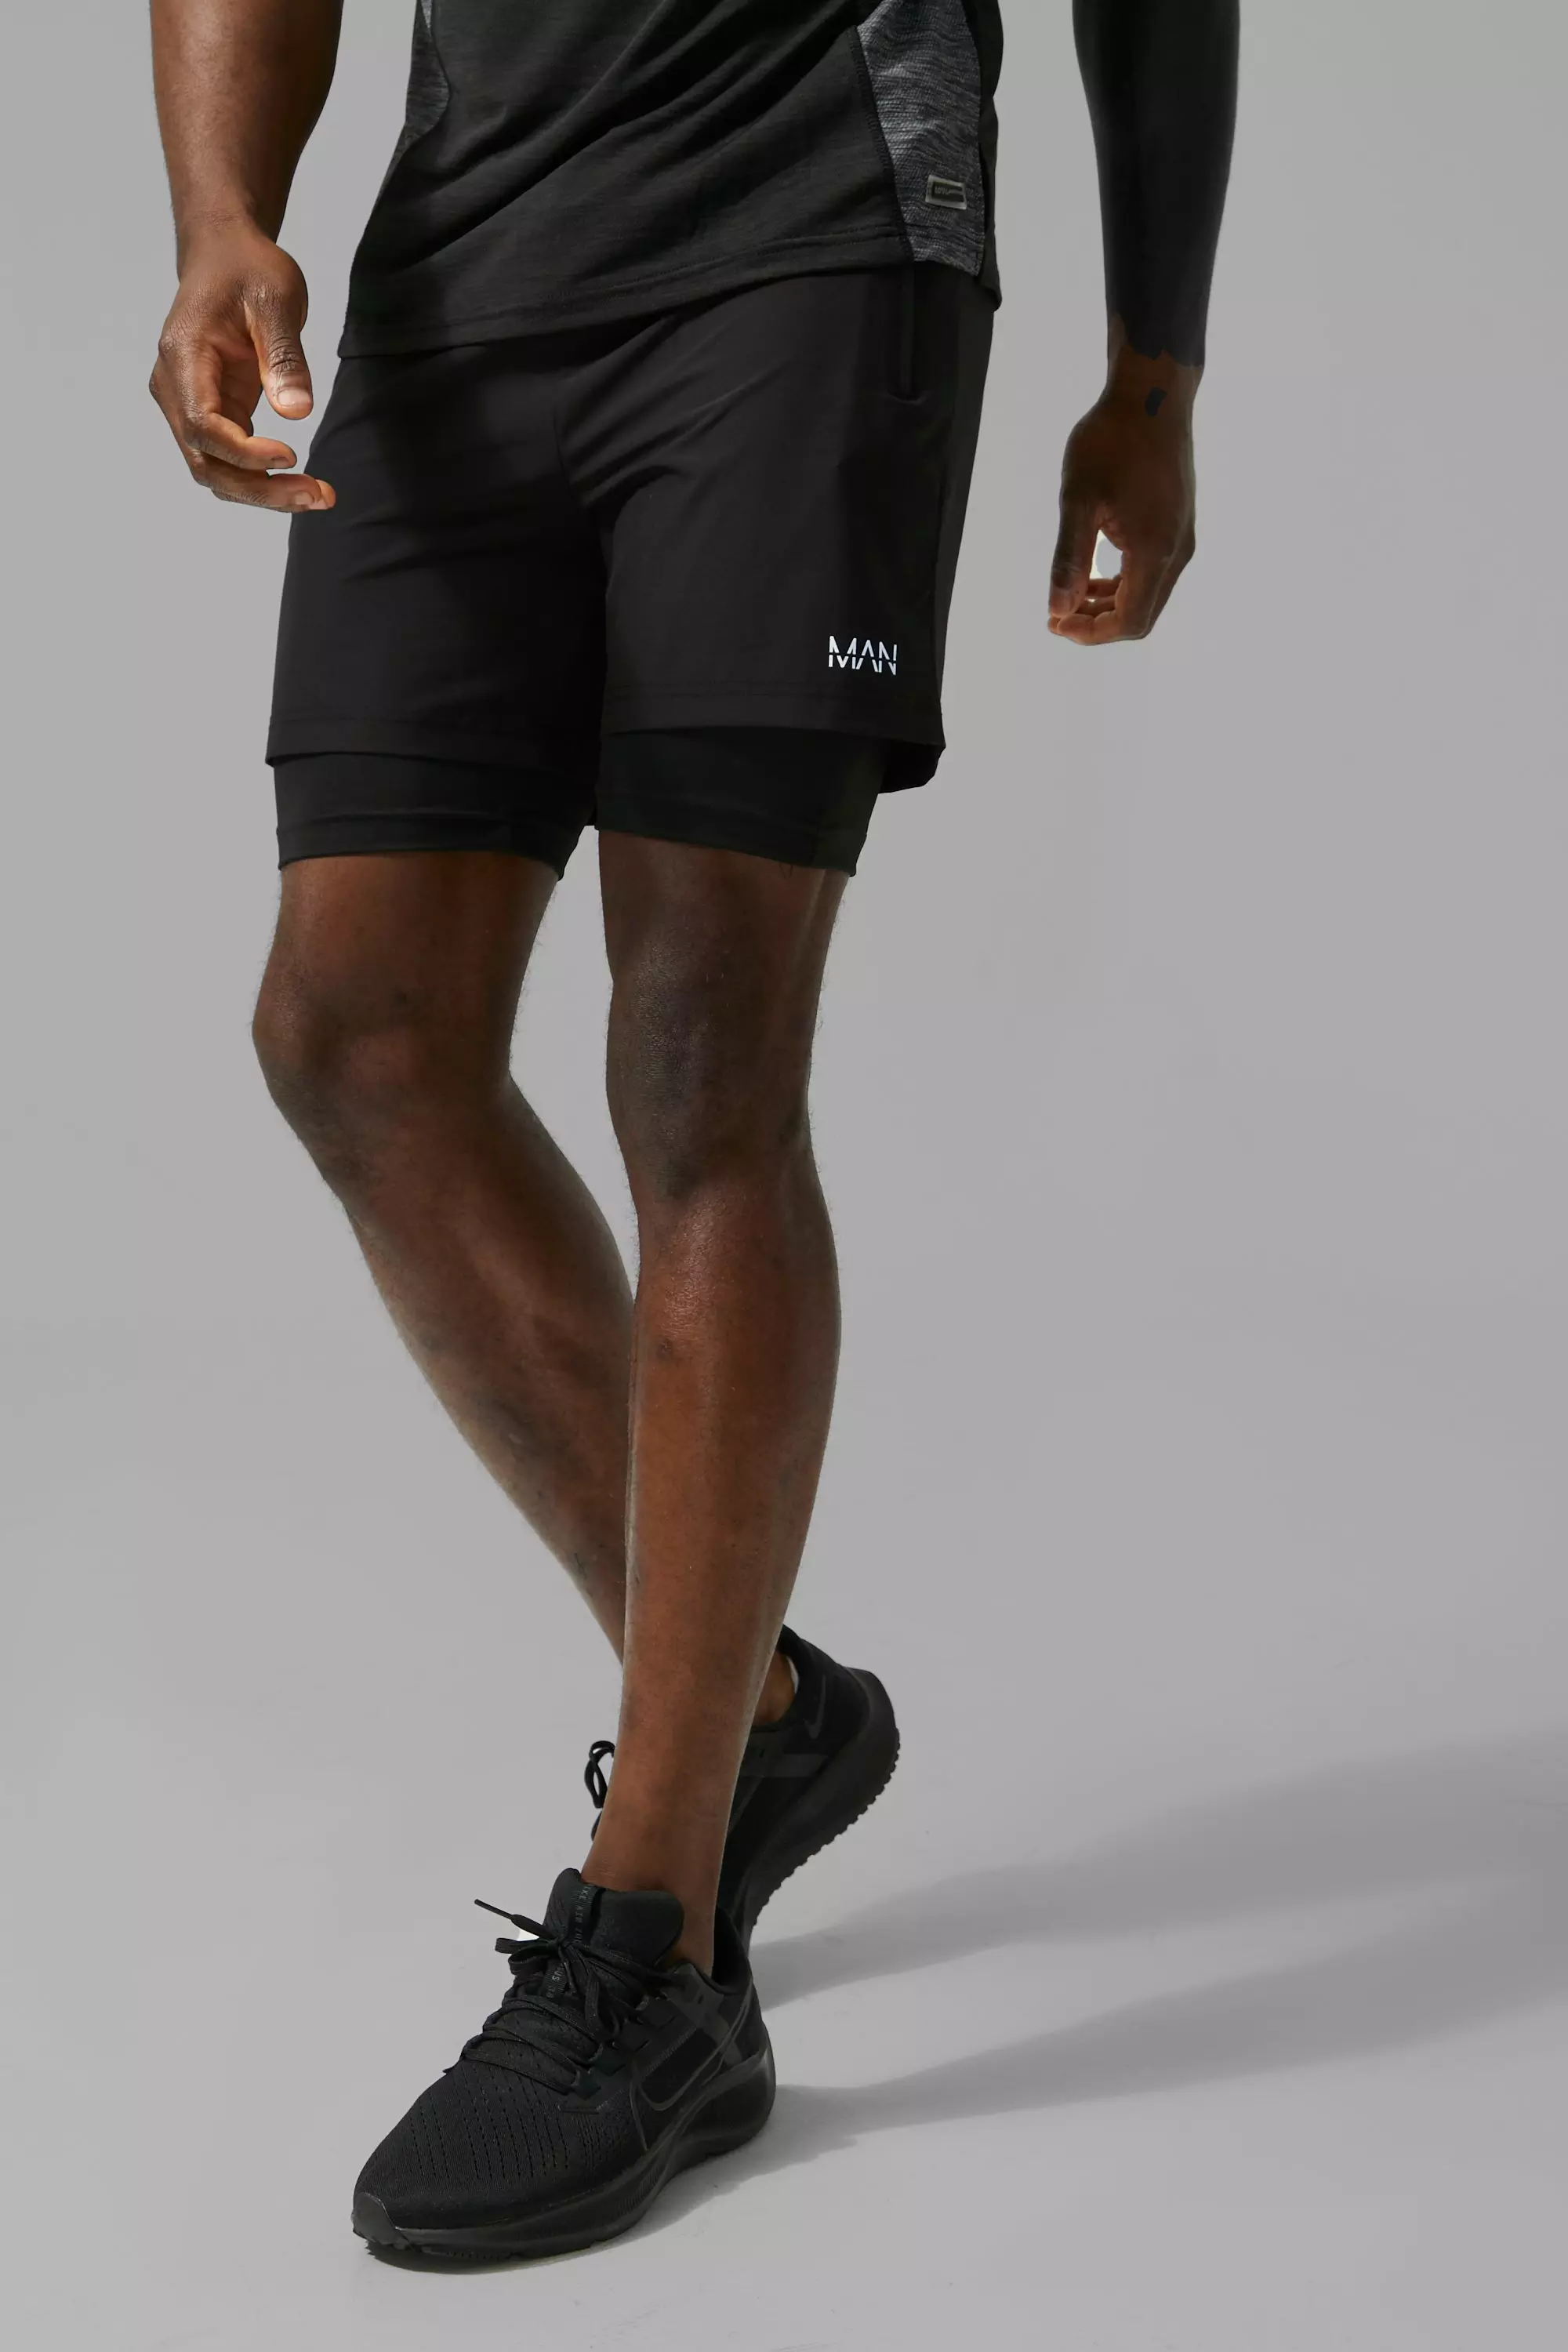 Man Active Gym 2-In-1 Shorts With 3/4 Legging | boohooMAN USA